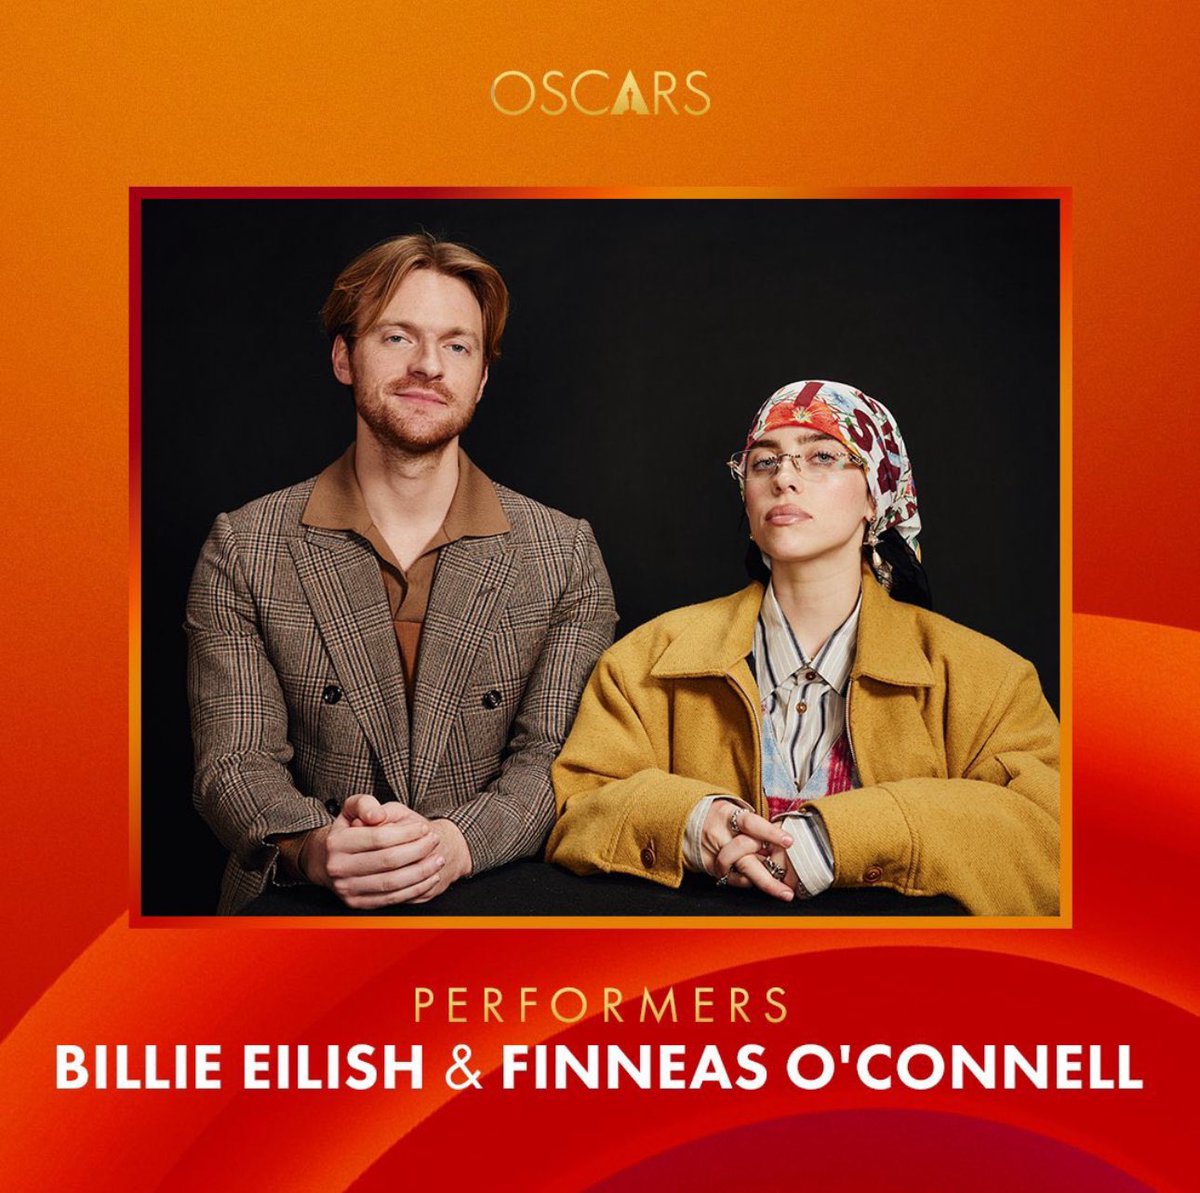 #BillieEilish and #FinneasOconnell will perform 'What Was I Made For?' at the ceremony at #Oscars  on March 10th.